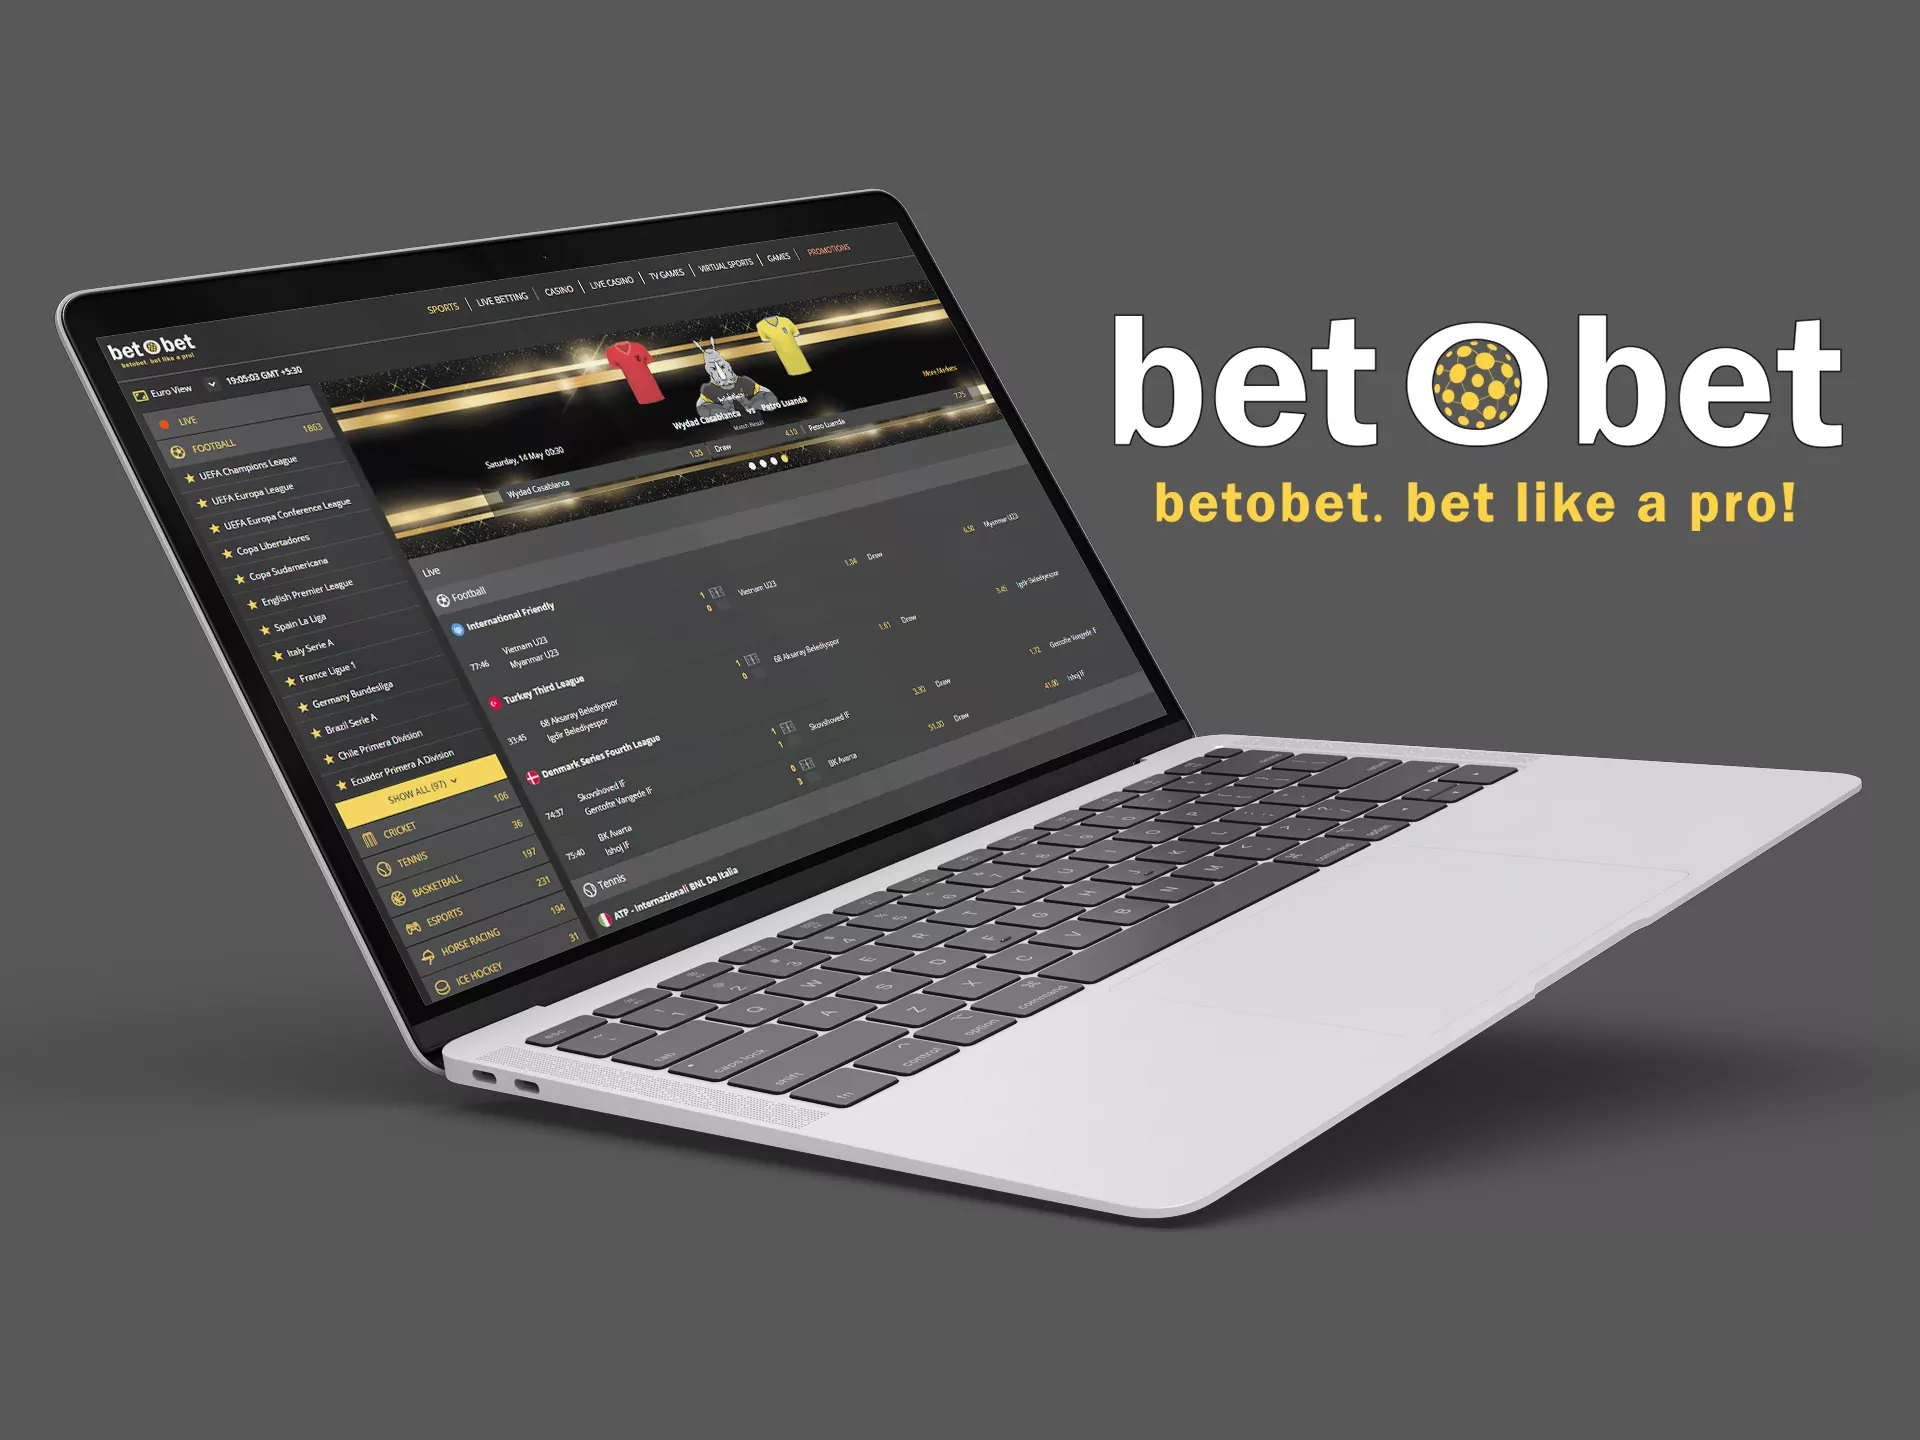 Betobet is a fully licensed bookmaker, which will confirm its complete safety.